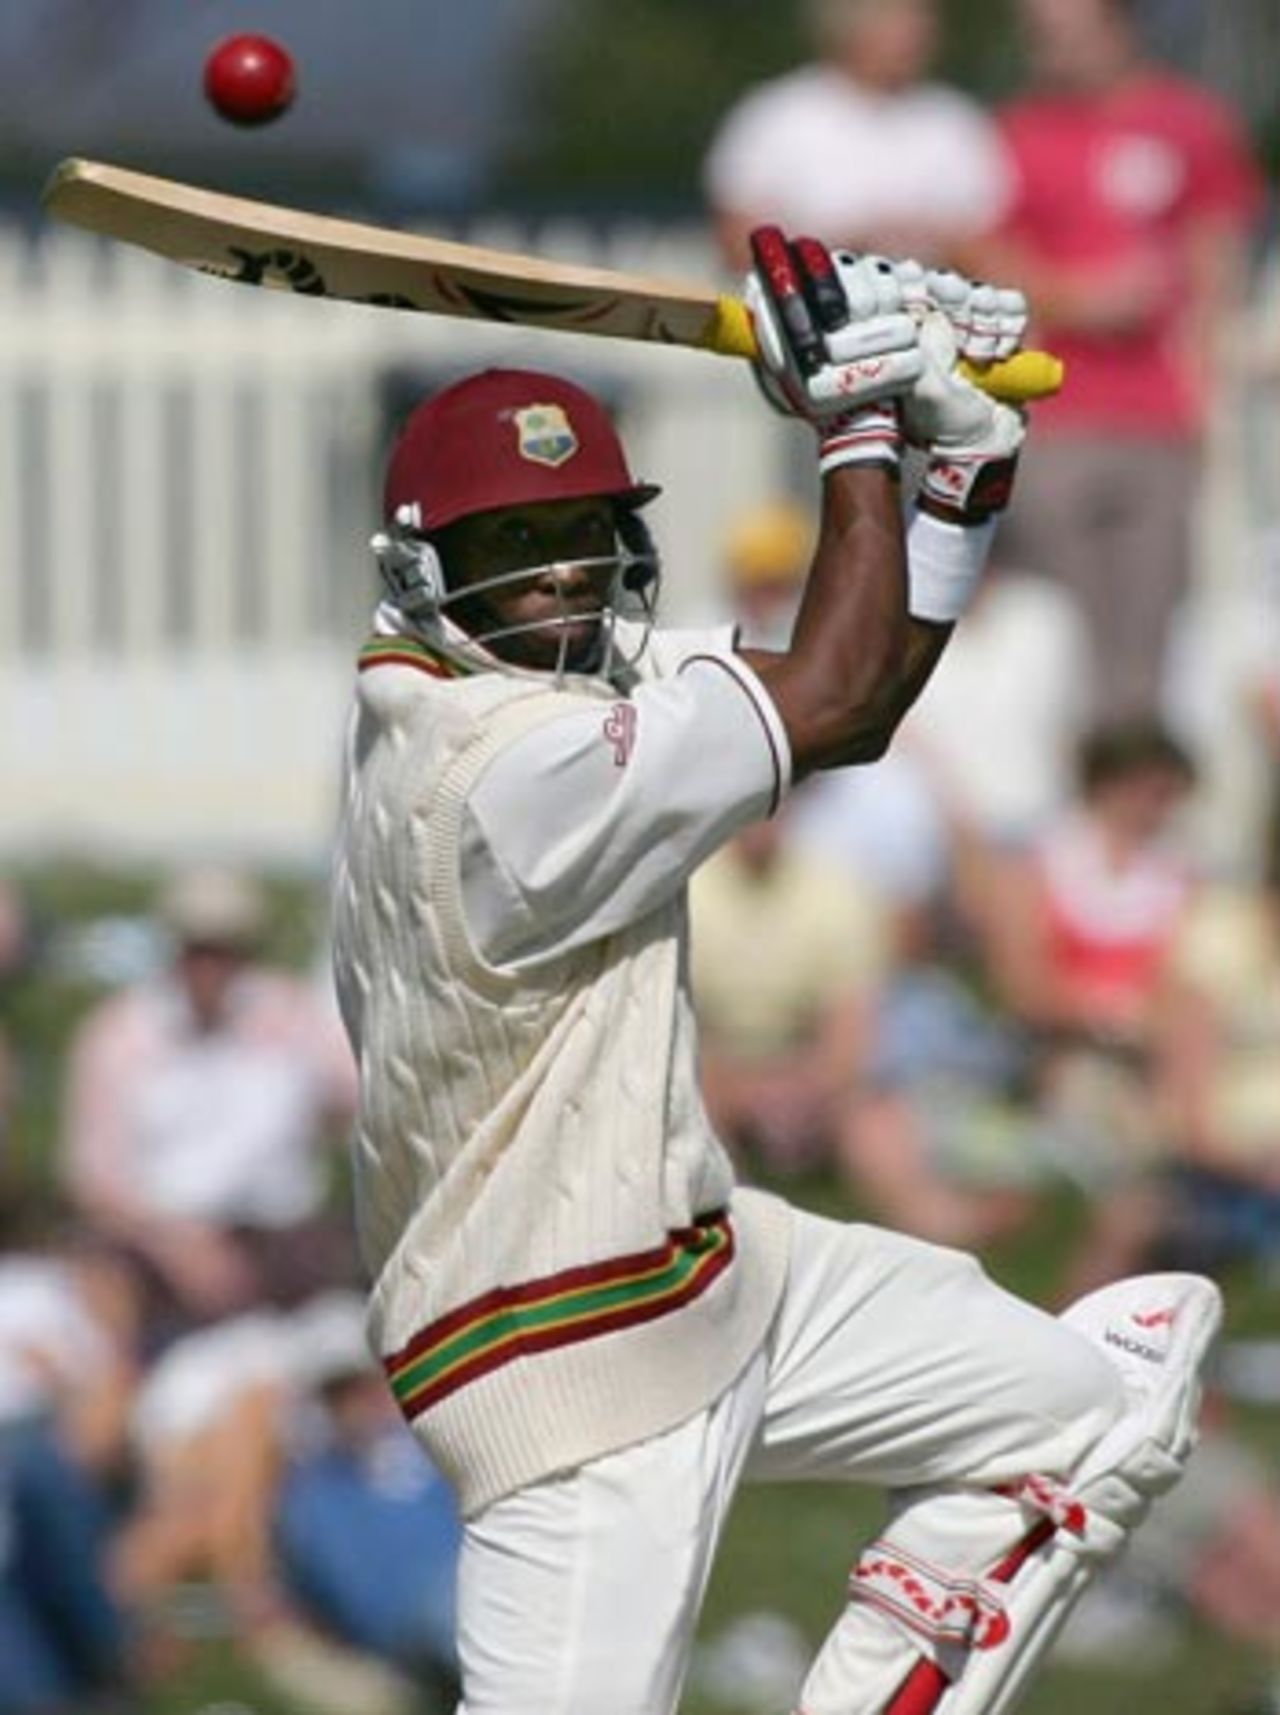 Dwayne Bravo smashes one through the off side en route to his century, Australia v West Indies, 2nd Test, Hobart, 4th day, November 20, 2005